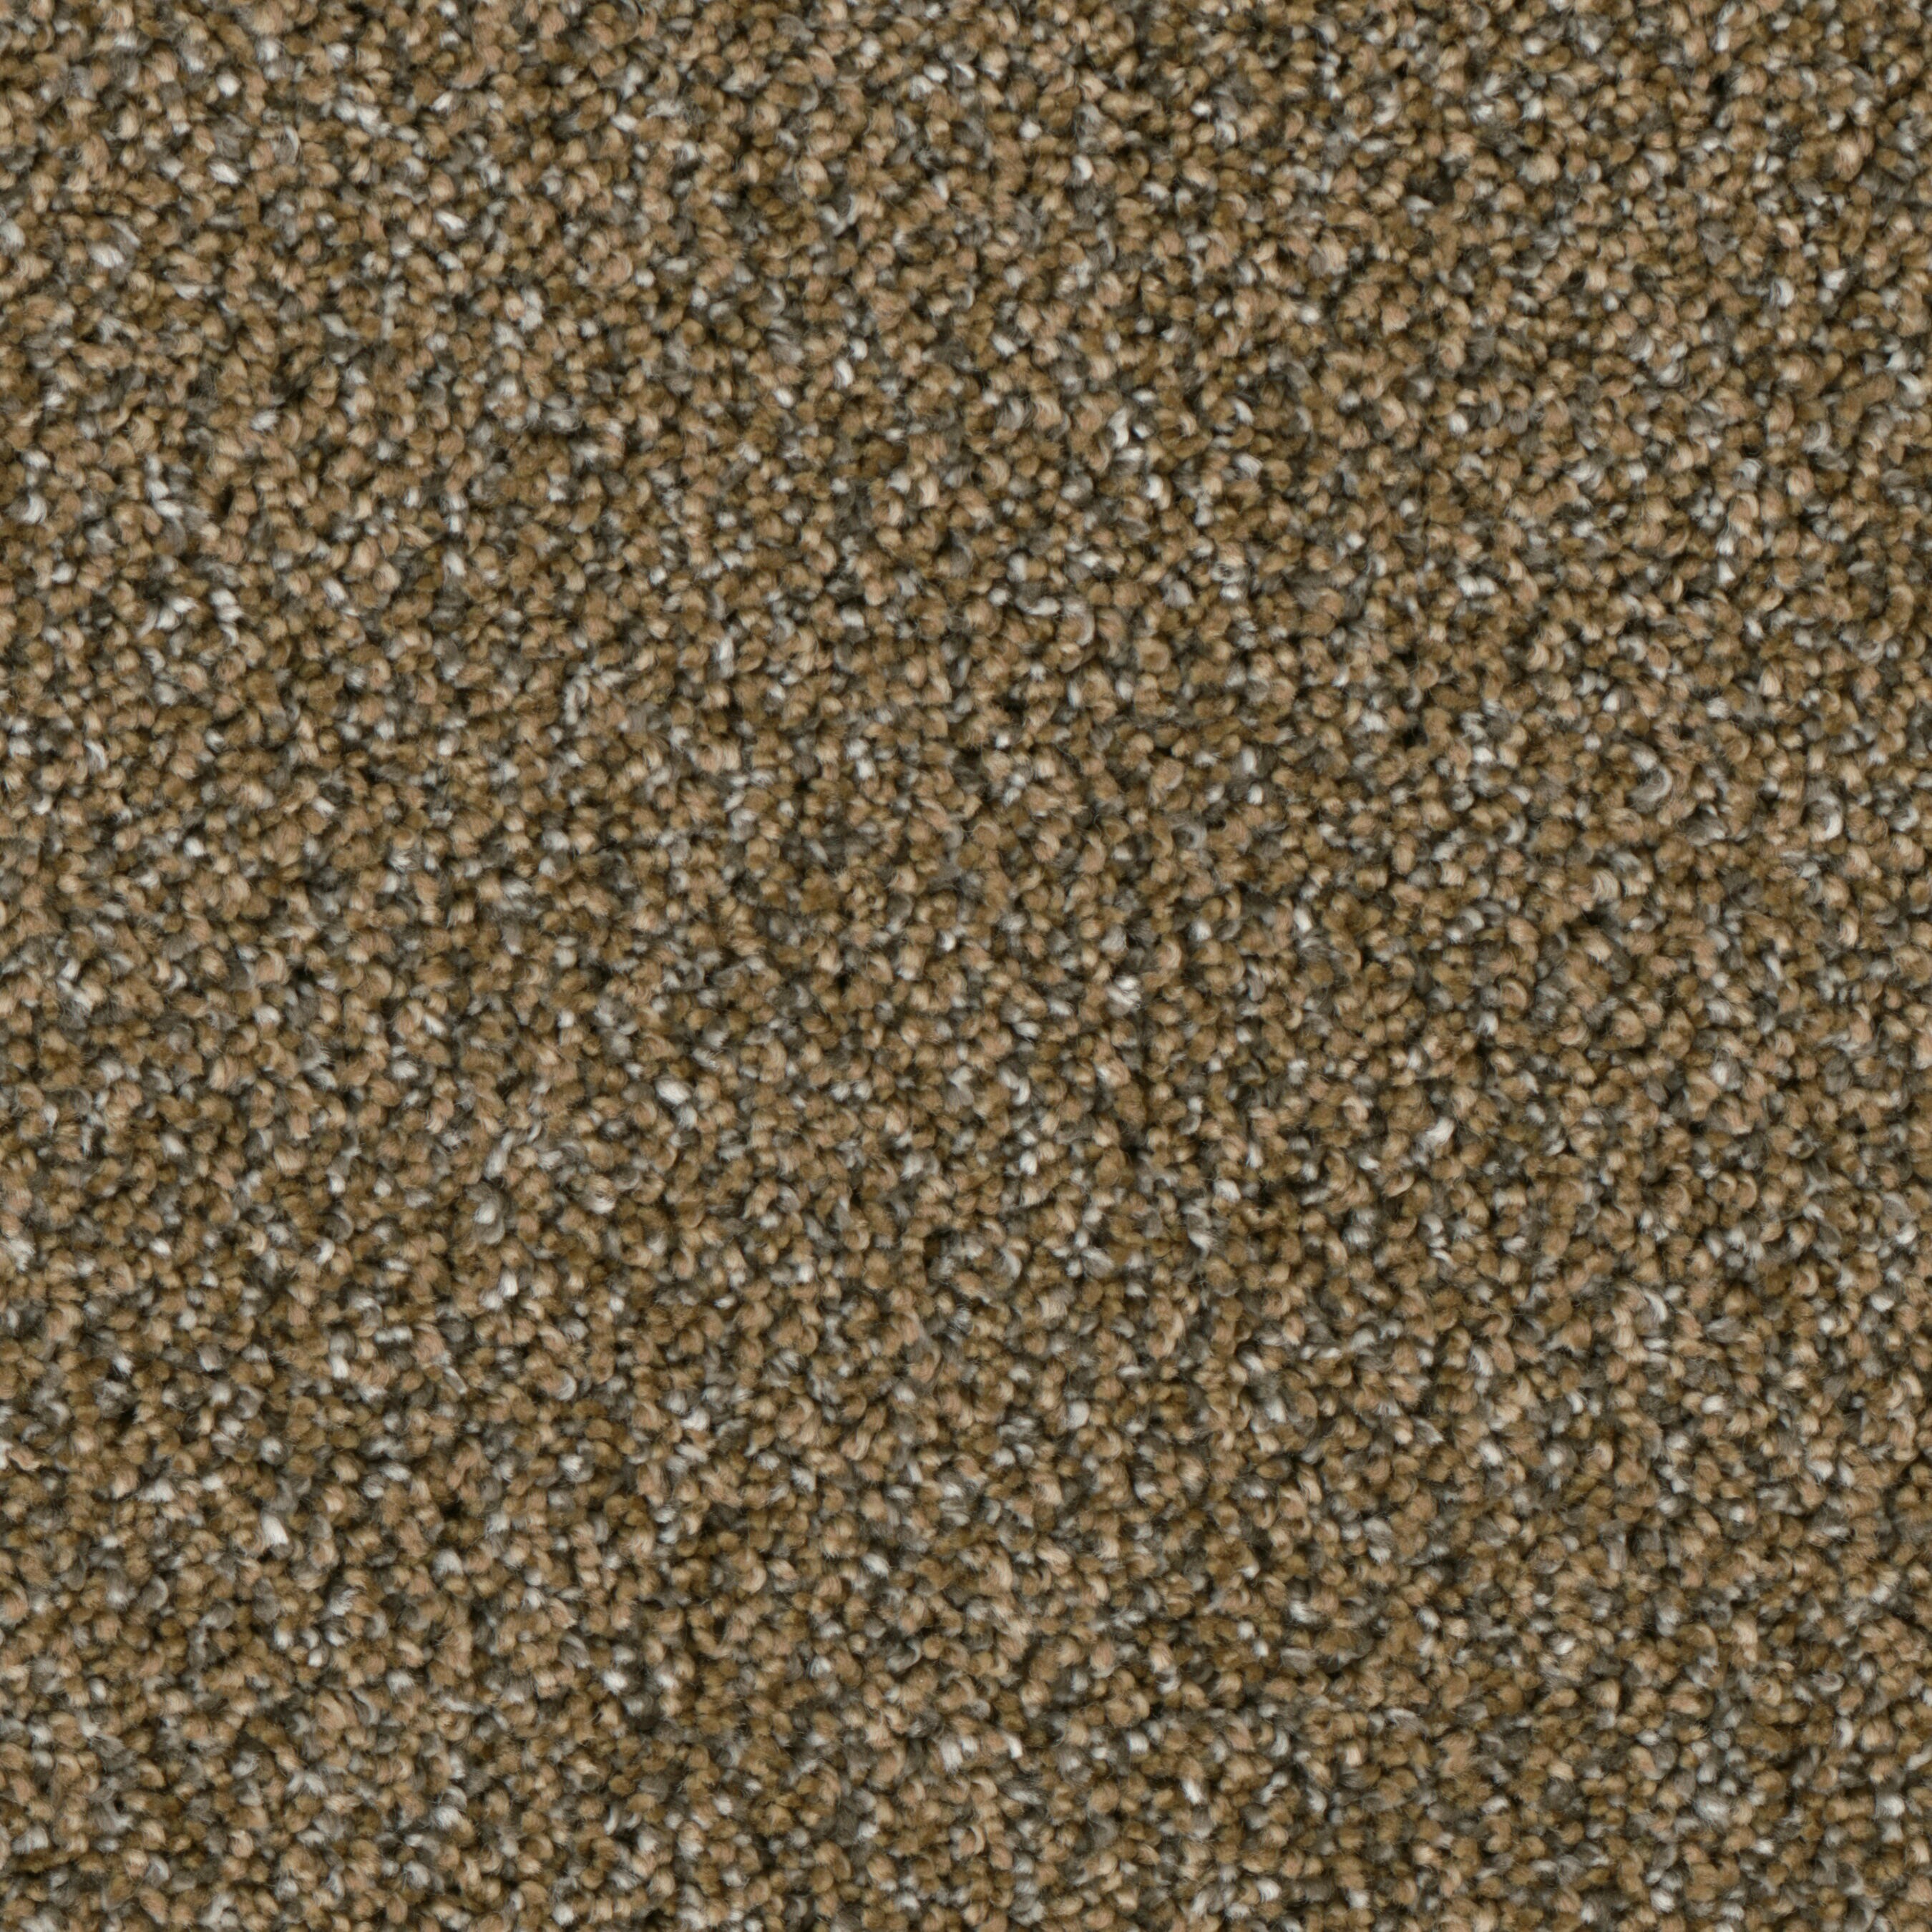 (Sample) Lenox Park Bungalow Textured Indoor Carpet | - STAINMASTER S9255-844-S